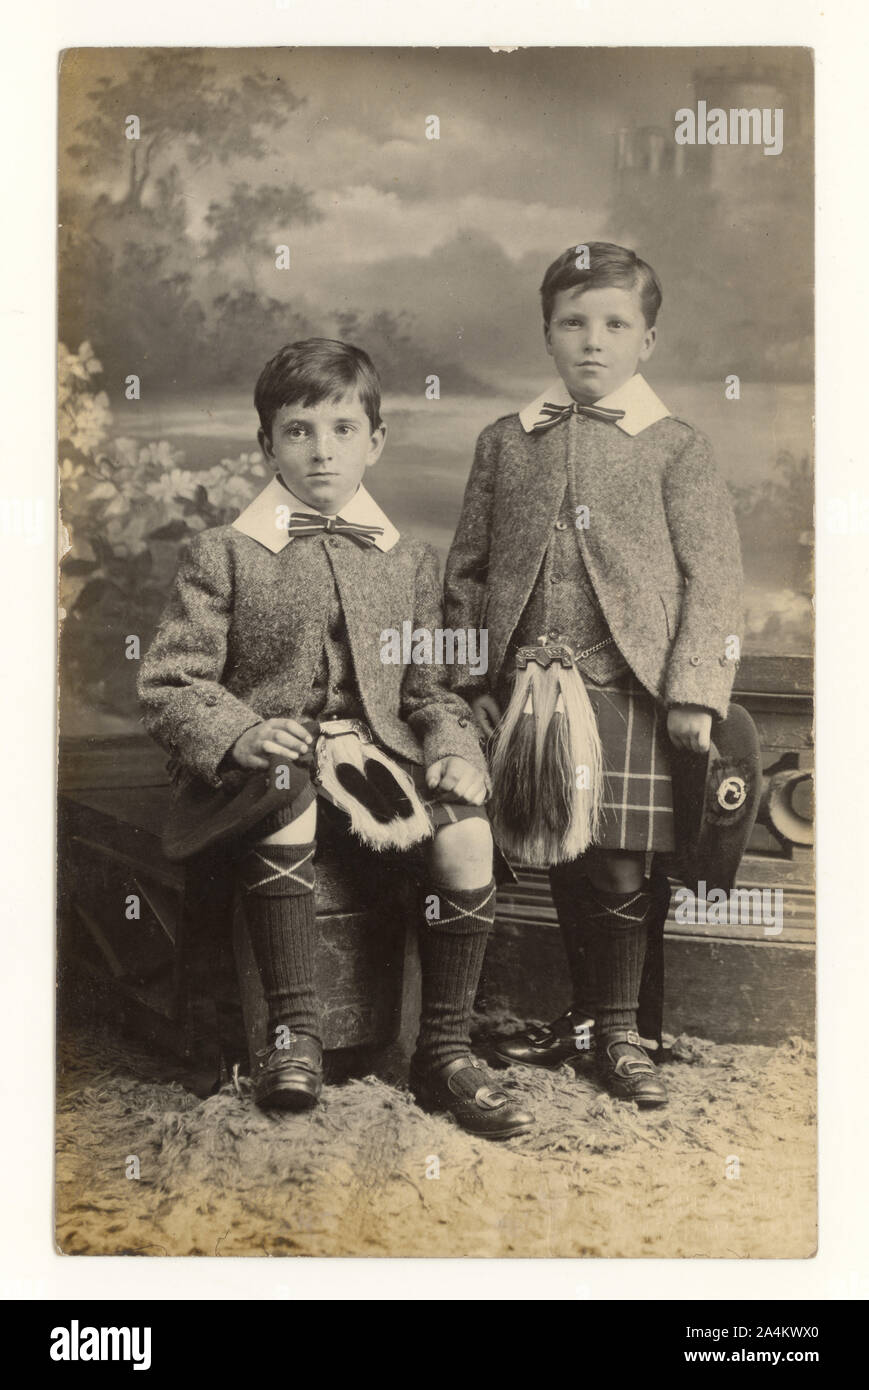 Early 1900's post Edwardian studio portrait of young brothers, William Purdie aged 8 years, Thomas Purdie aged 5,  wearing sporrans, dated 29 June 1912, Hamilton, Lanarkshire, Scotland, U.K. Stock Photo